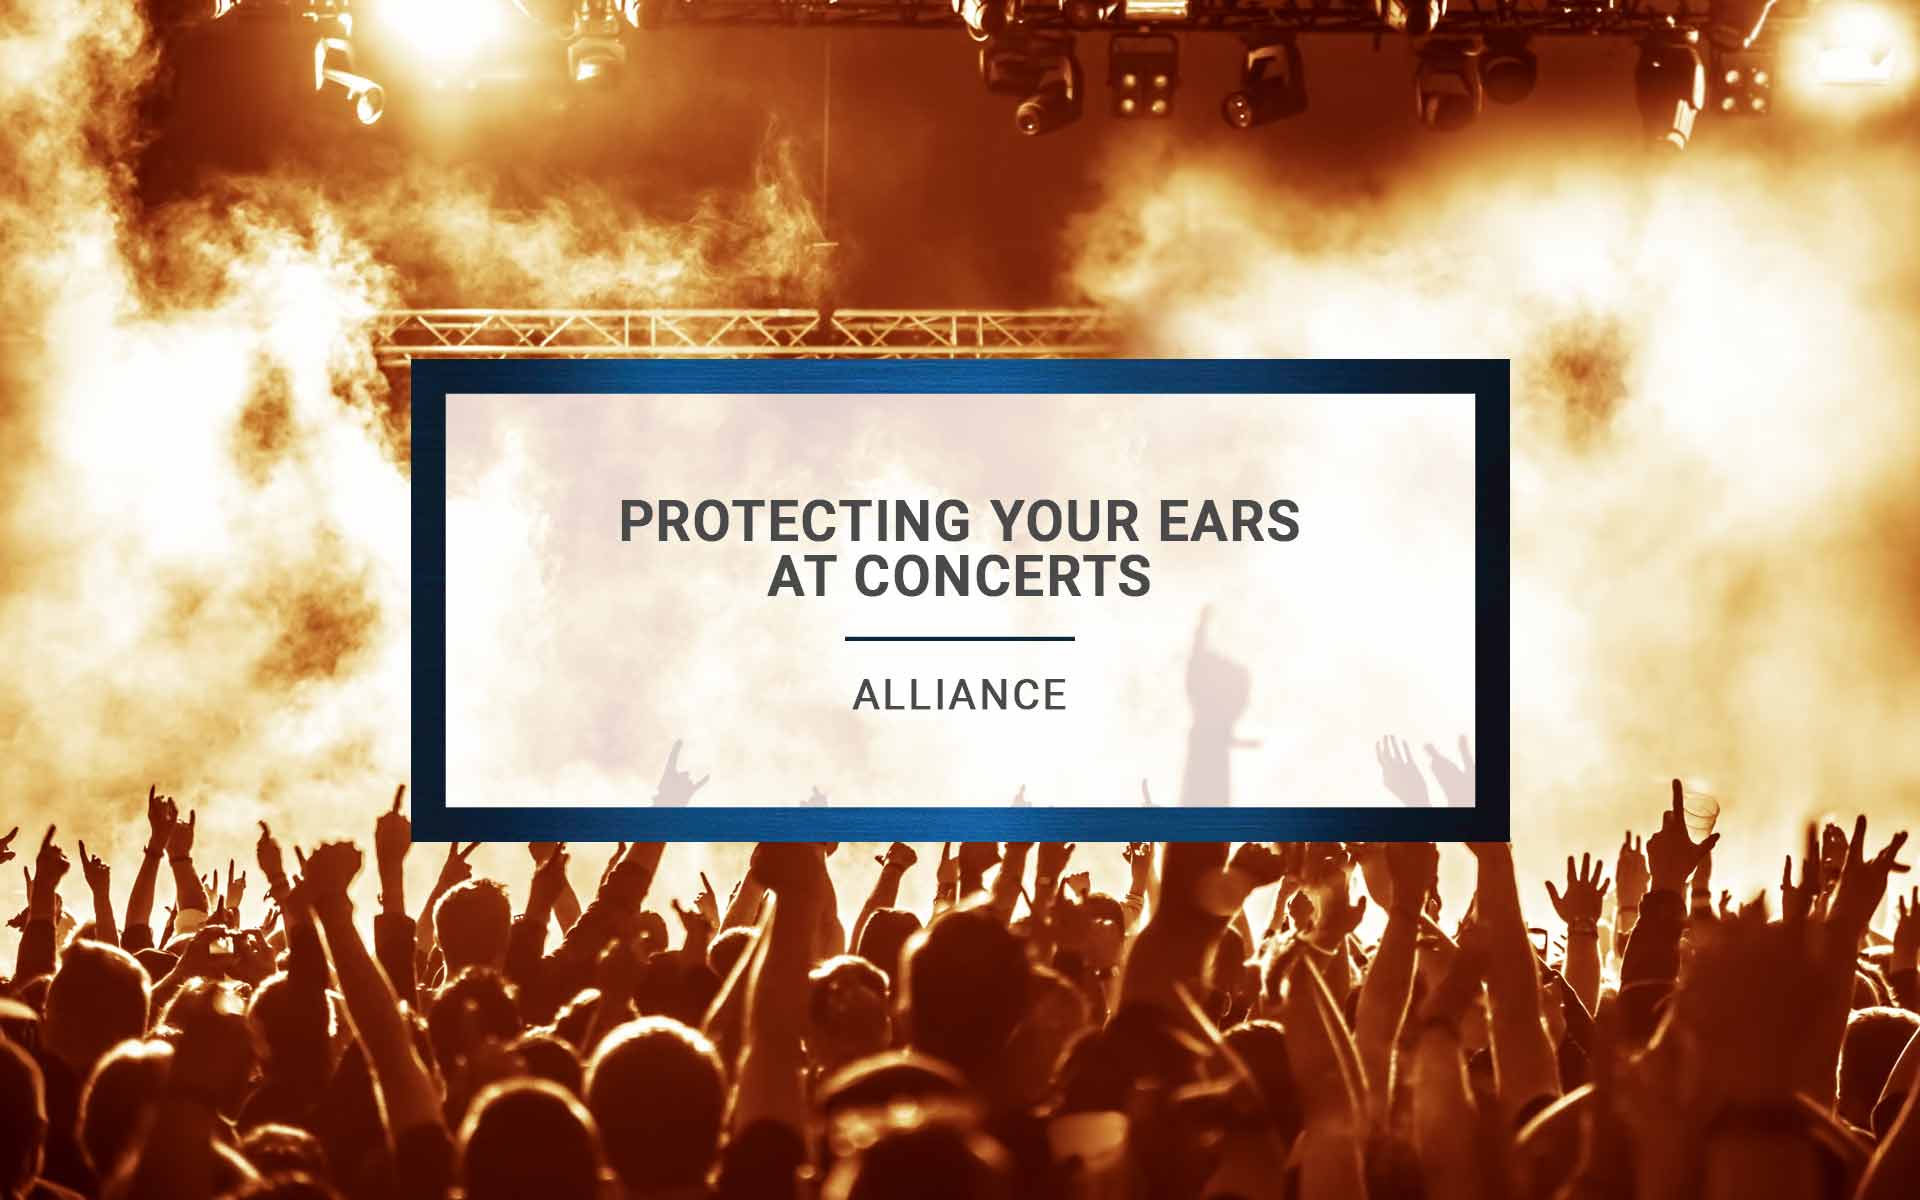 Protecting Your Ears at Concerts